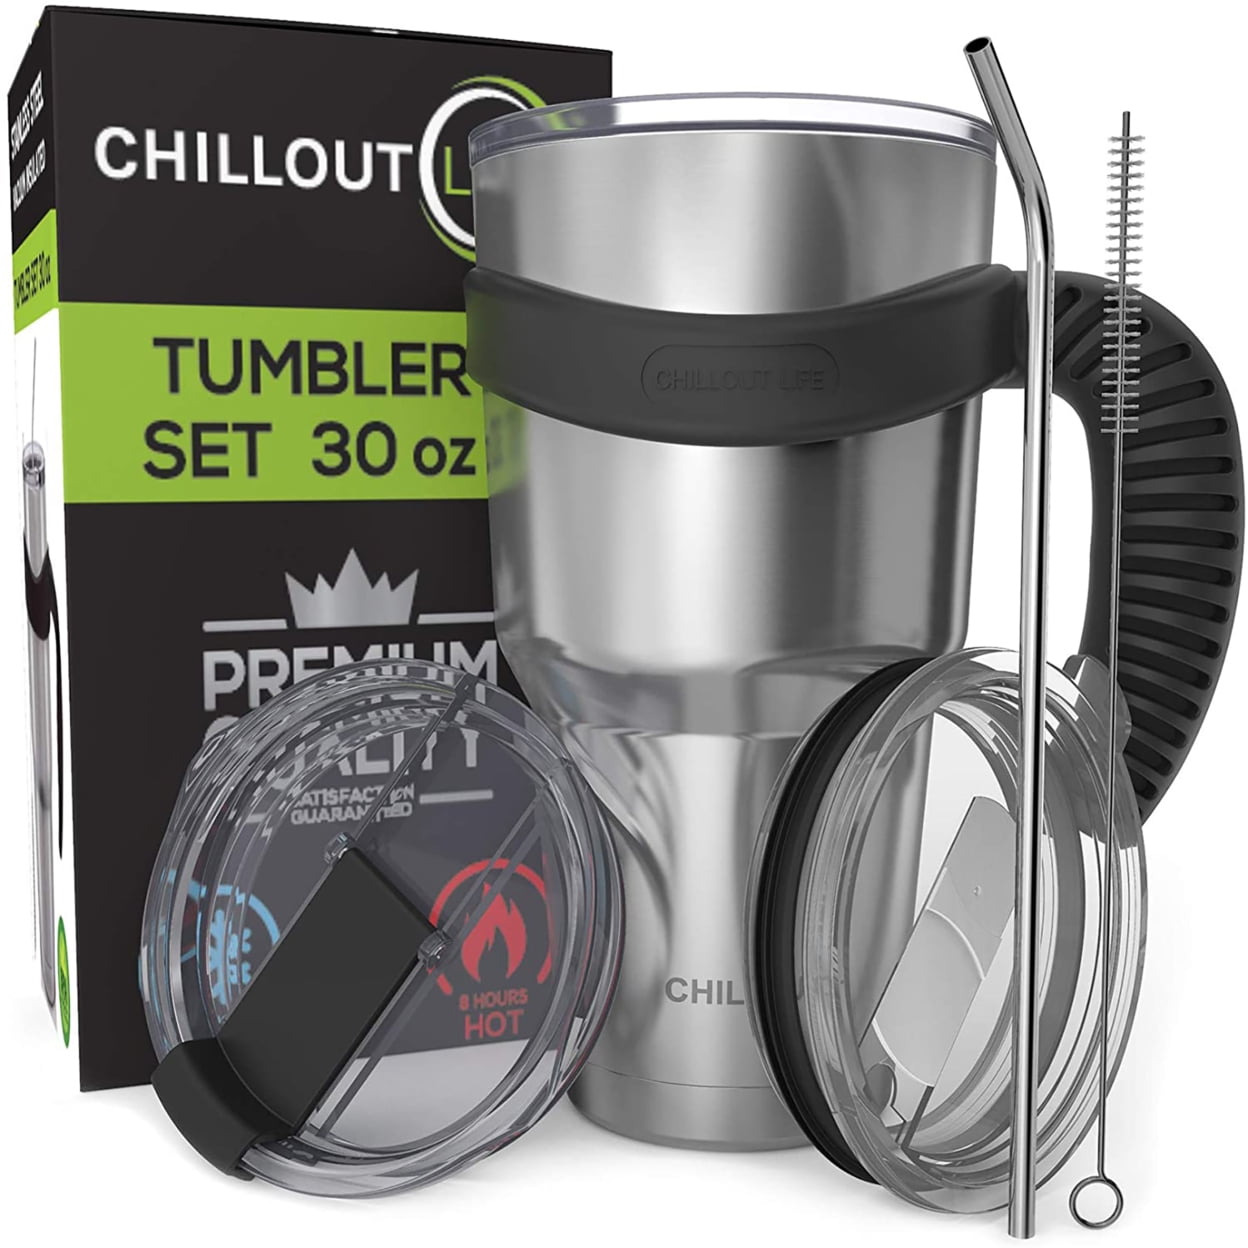 Stainless Steel Tumbler Cups, All-Day Heat/Chill